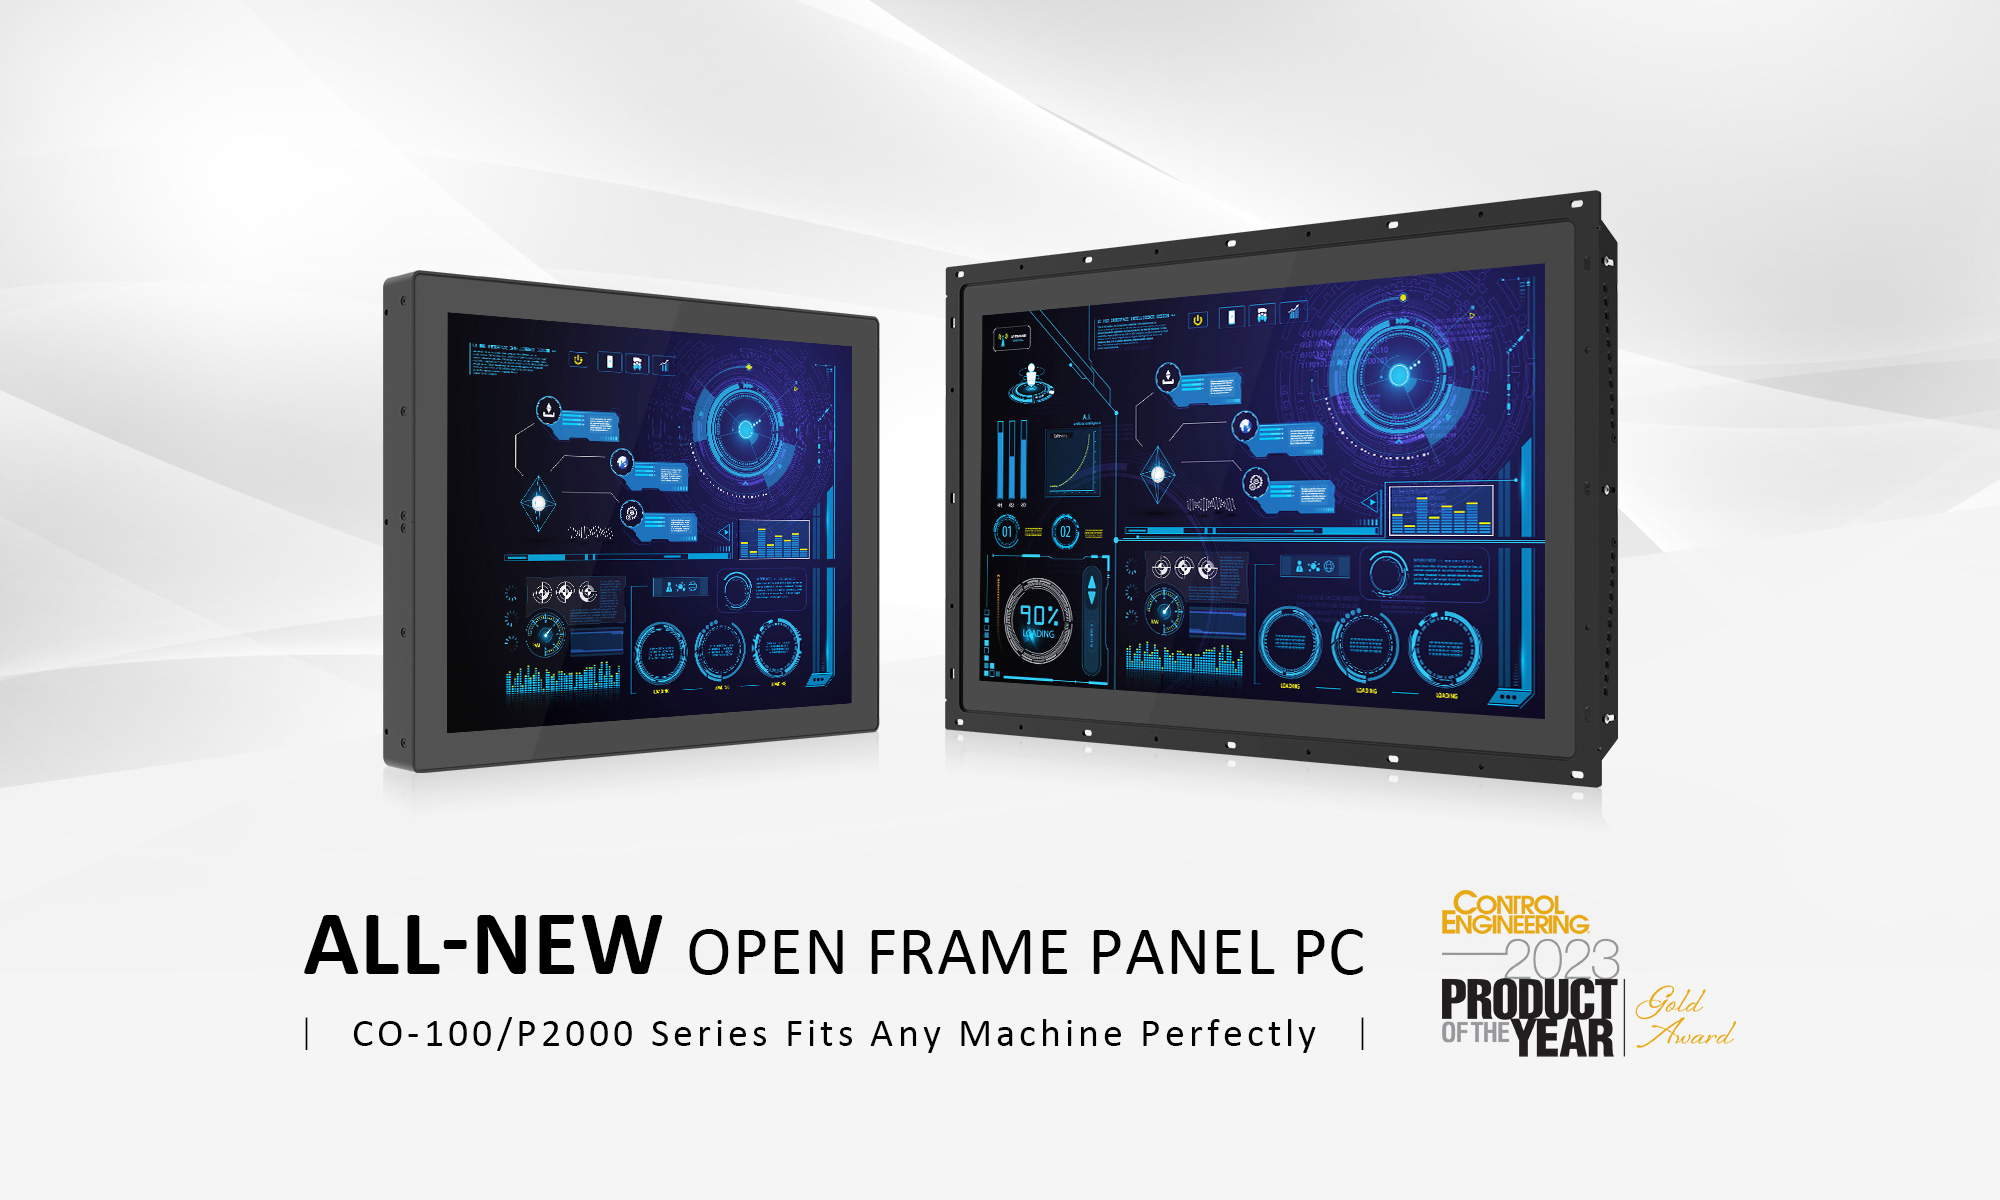 All new open frame panel pc - CO-100/P2102 Series Fits Any Machine Perfectly